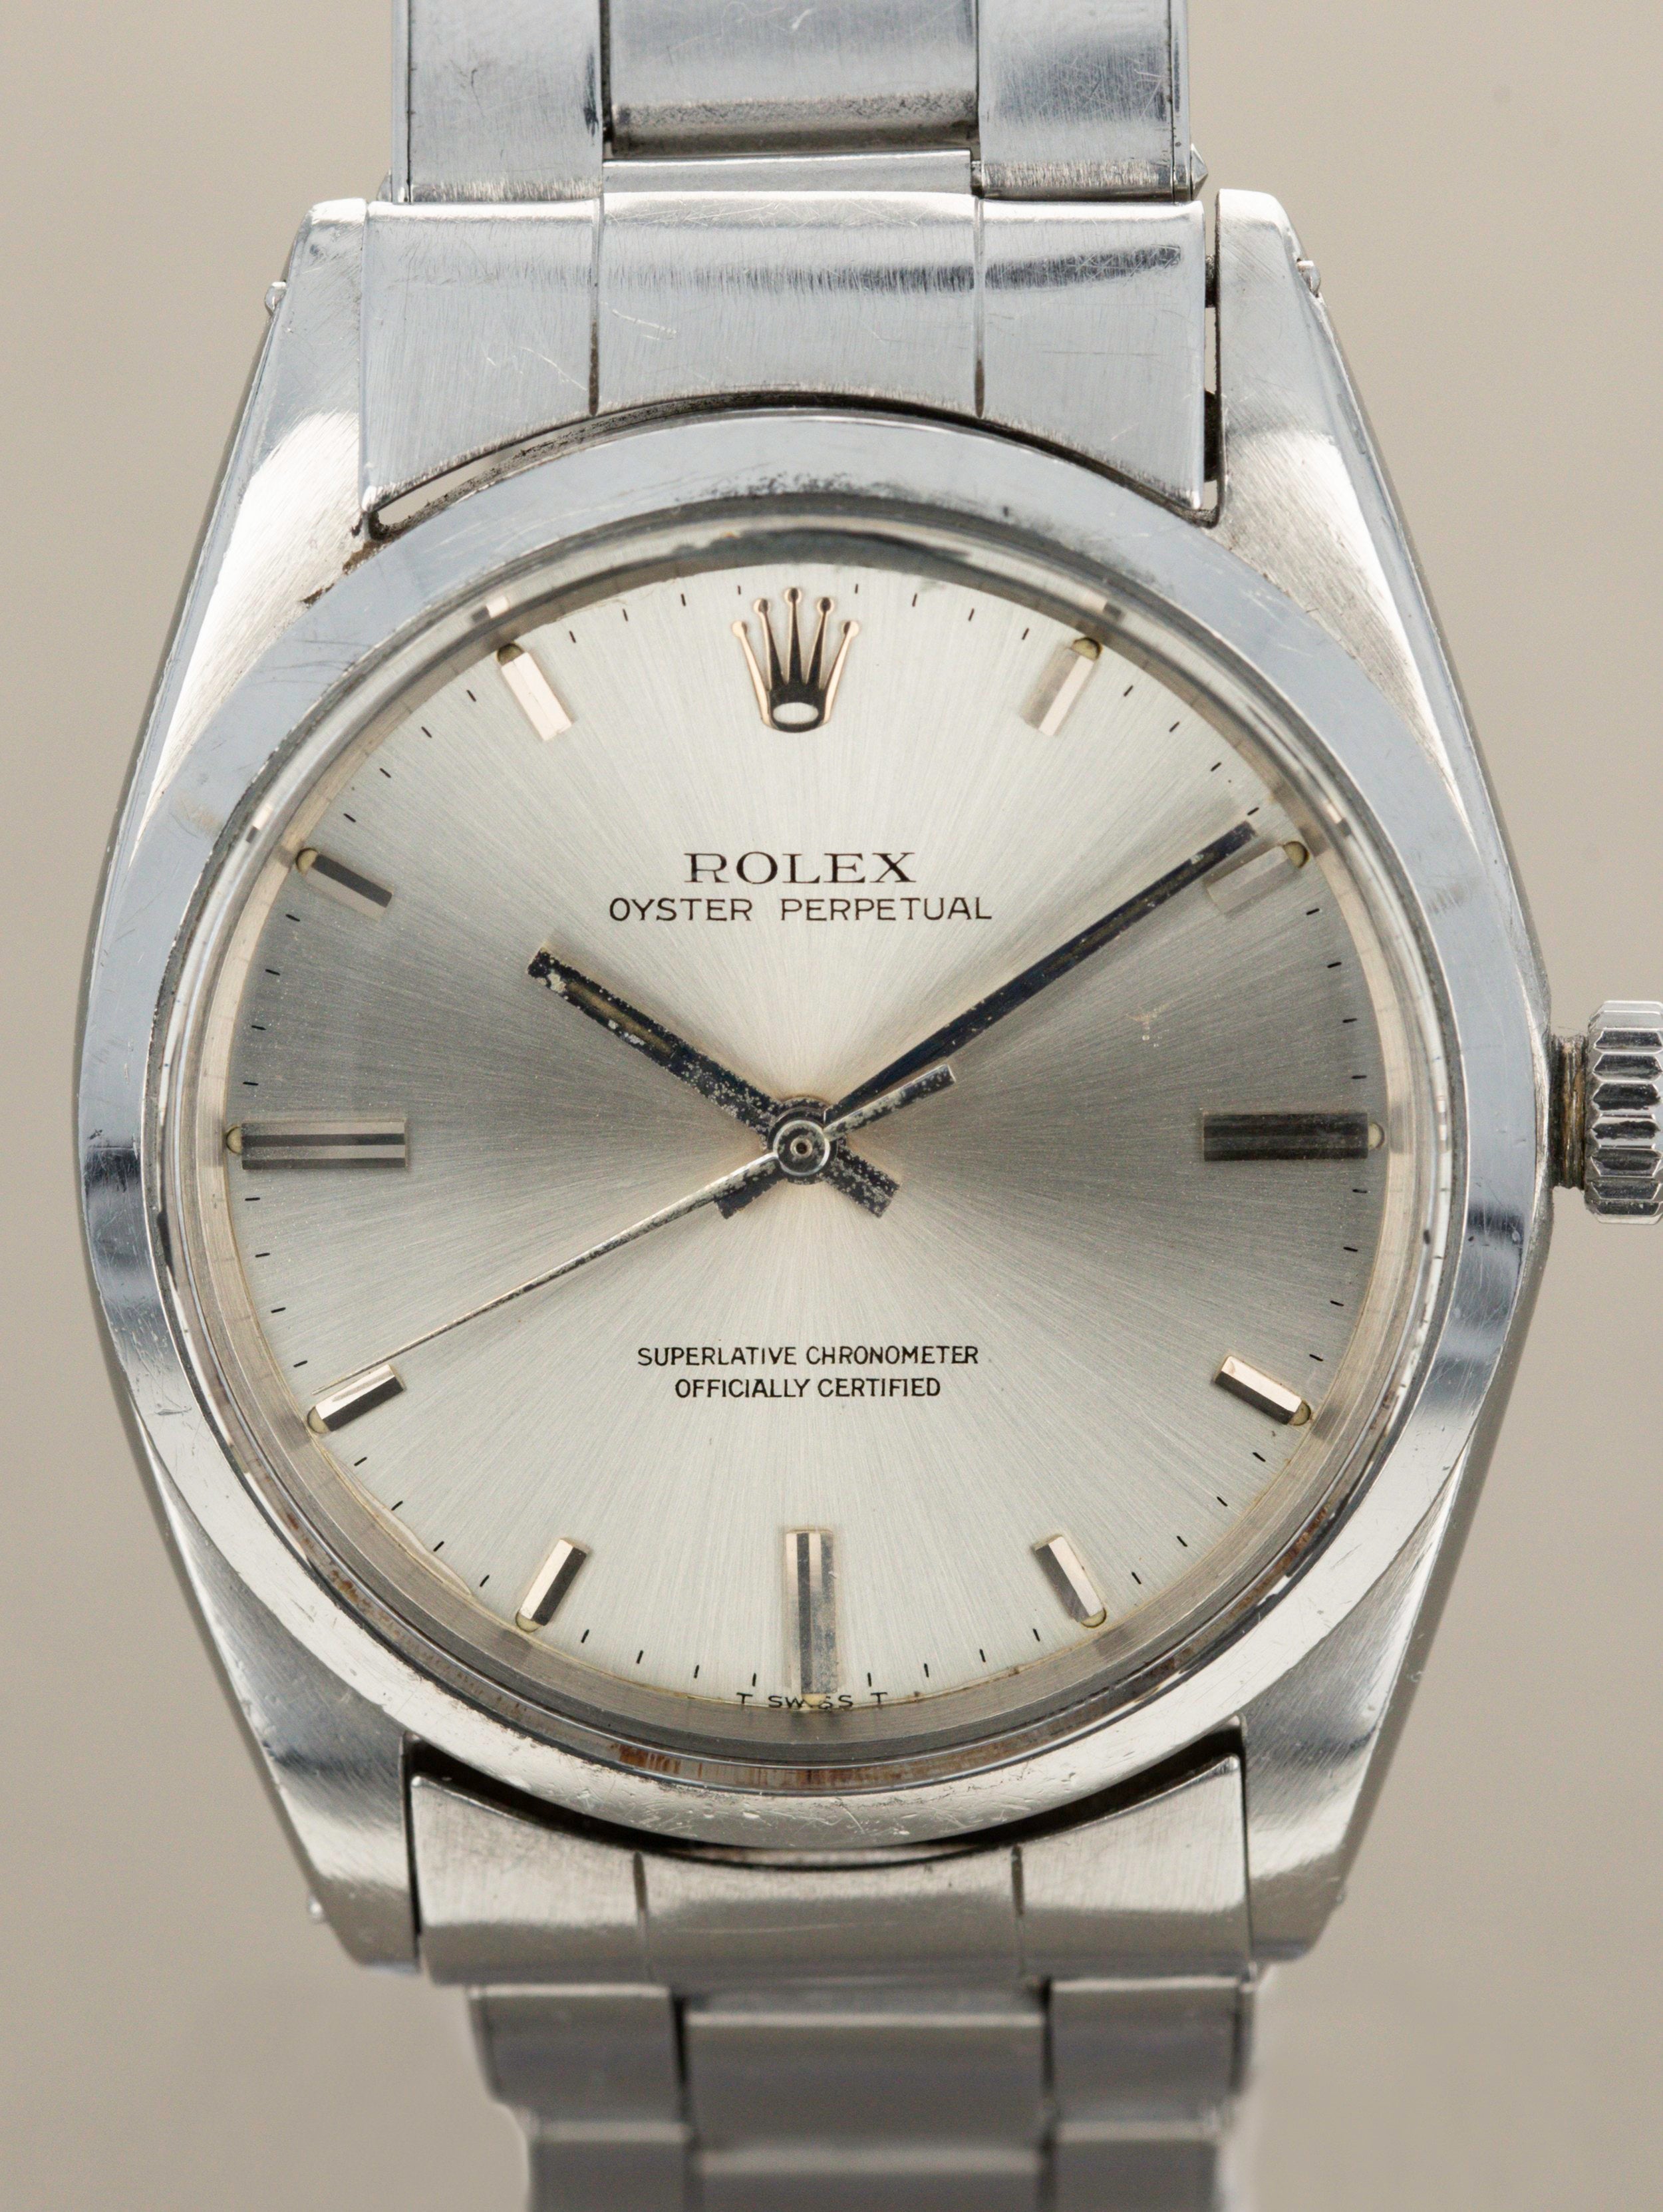 Rolex Oyster Perpetual Ref 1018 - 36mm Case